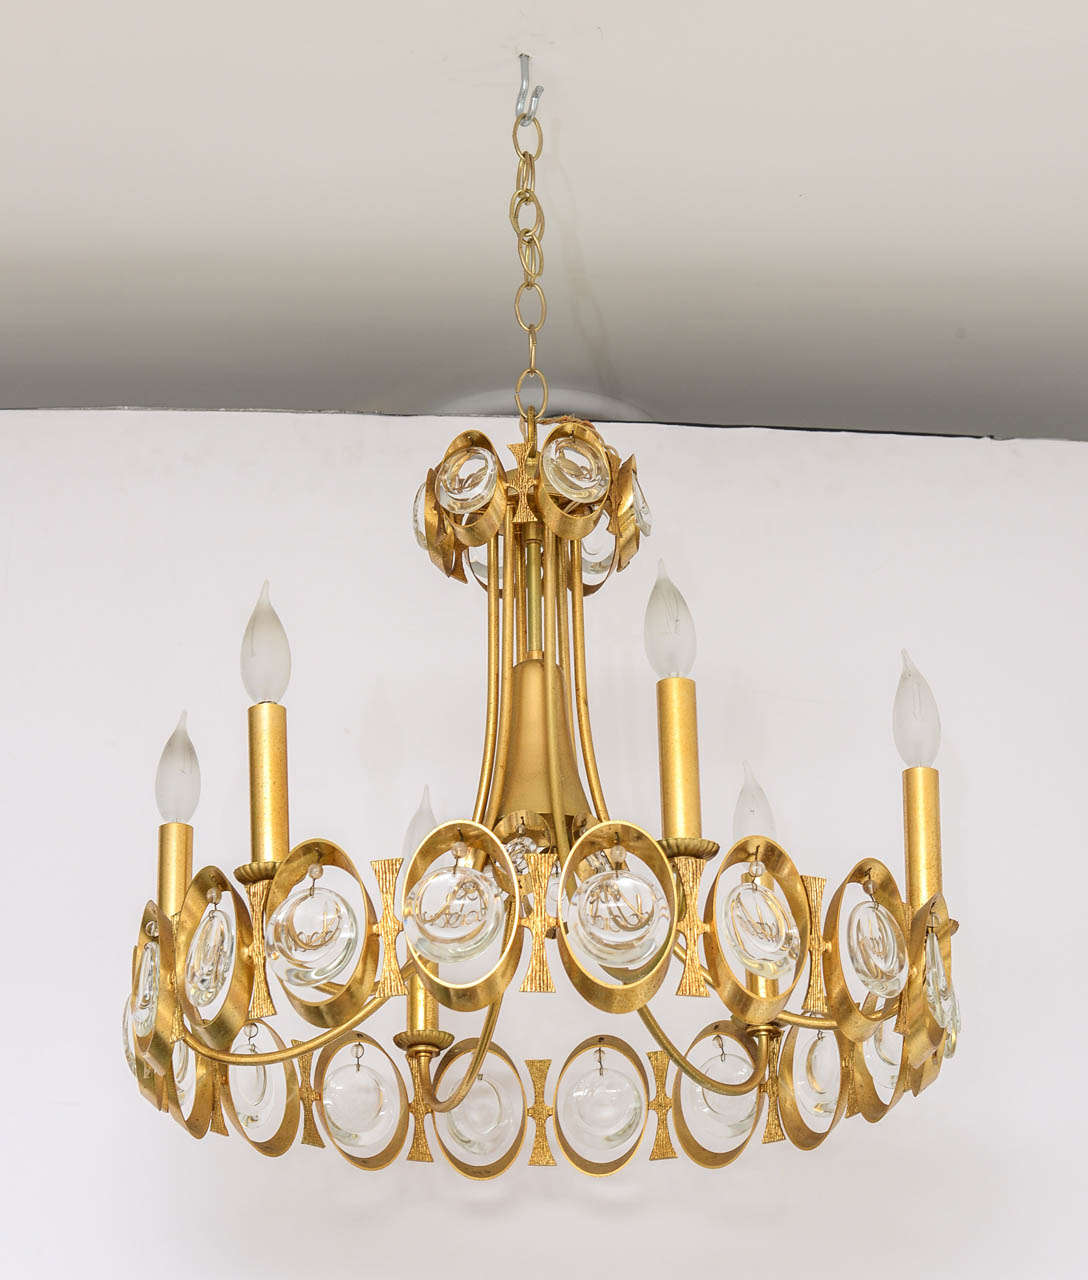 Gorgeous chandelier designed by Sciolari and manufactured in Austria in the early 1960s. This design was made in several forms from small to large and from one tier to multiple tiers. This design has become rare and hard to find and features one